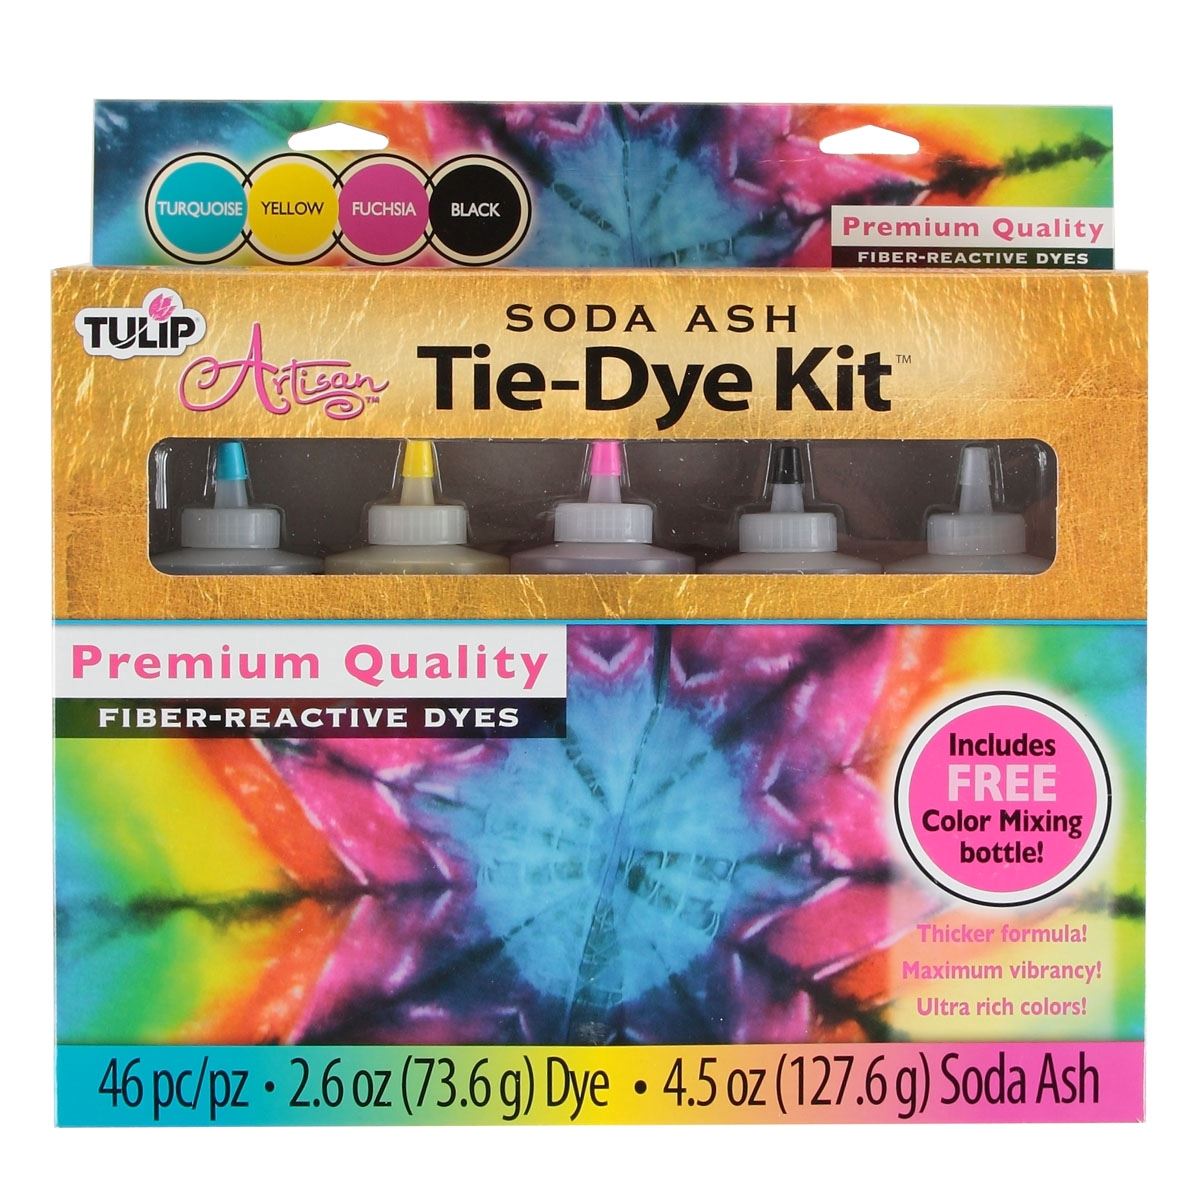 How to use soda ash for tie dye